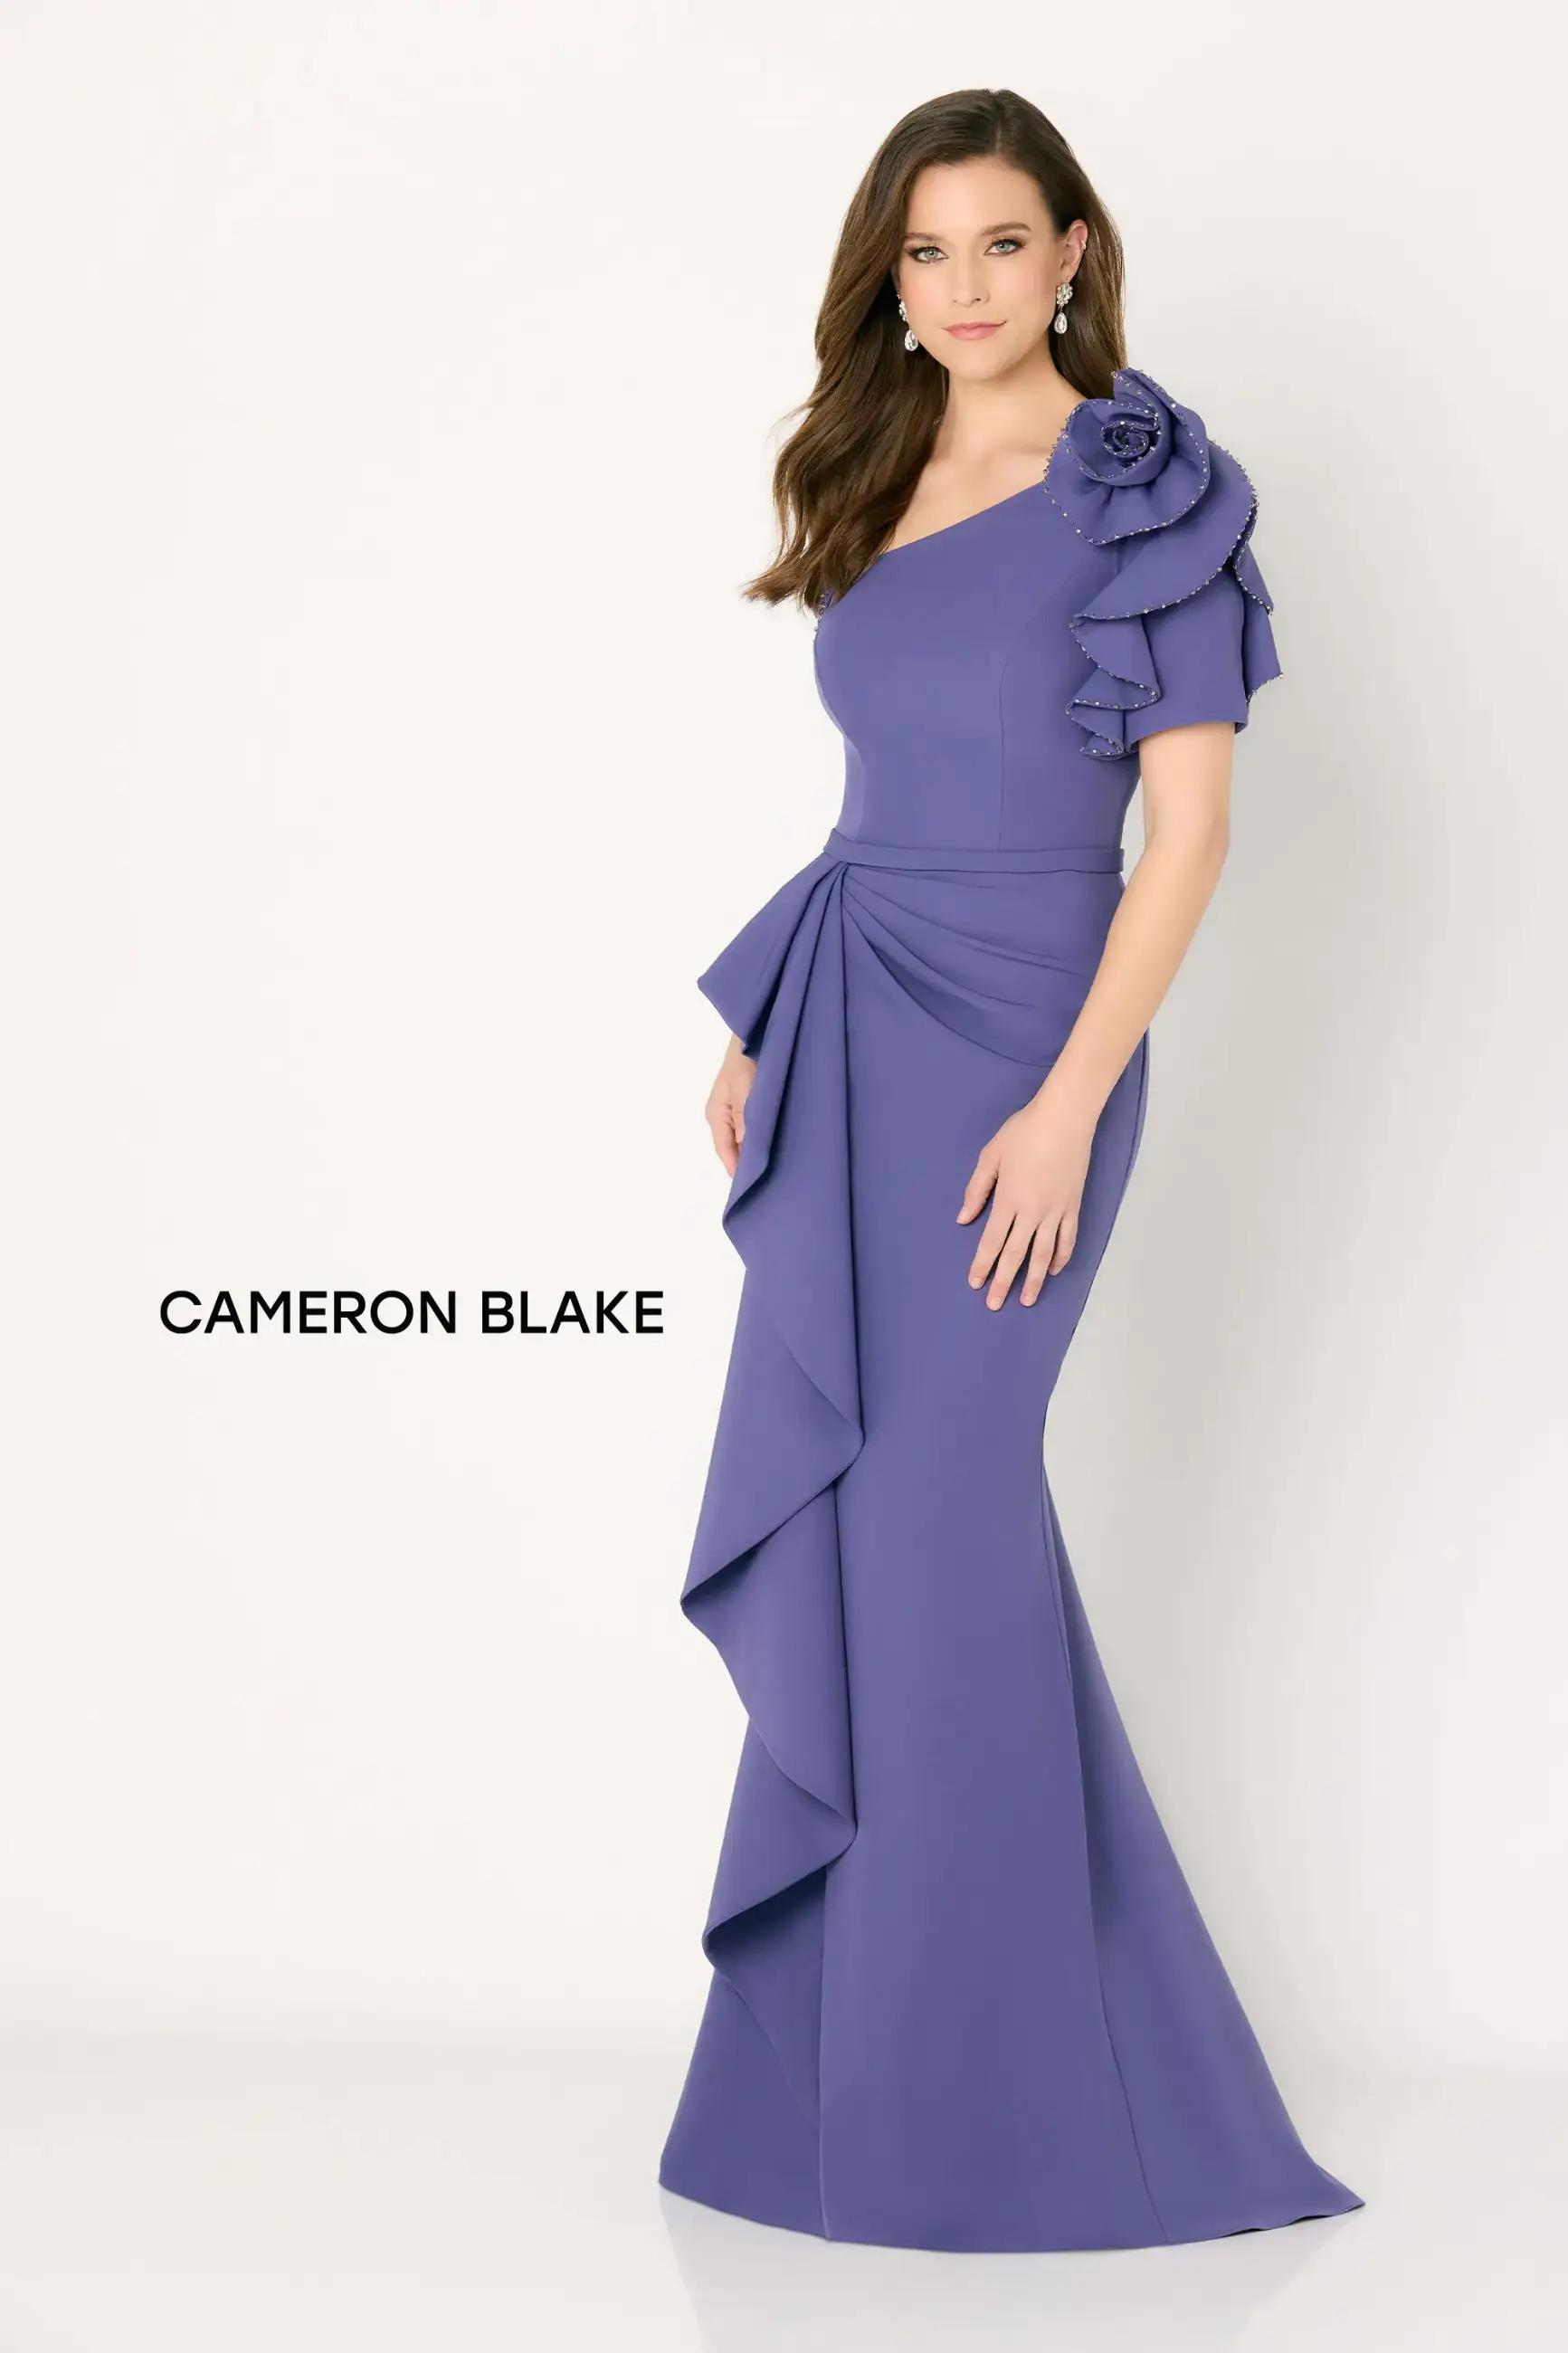 Effortless Elegance: Finding the Ideal Evening Gown for Dublin Moms Image